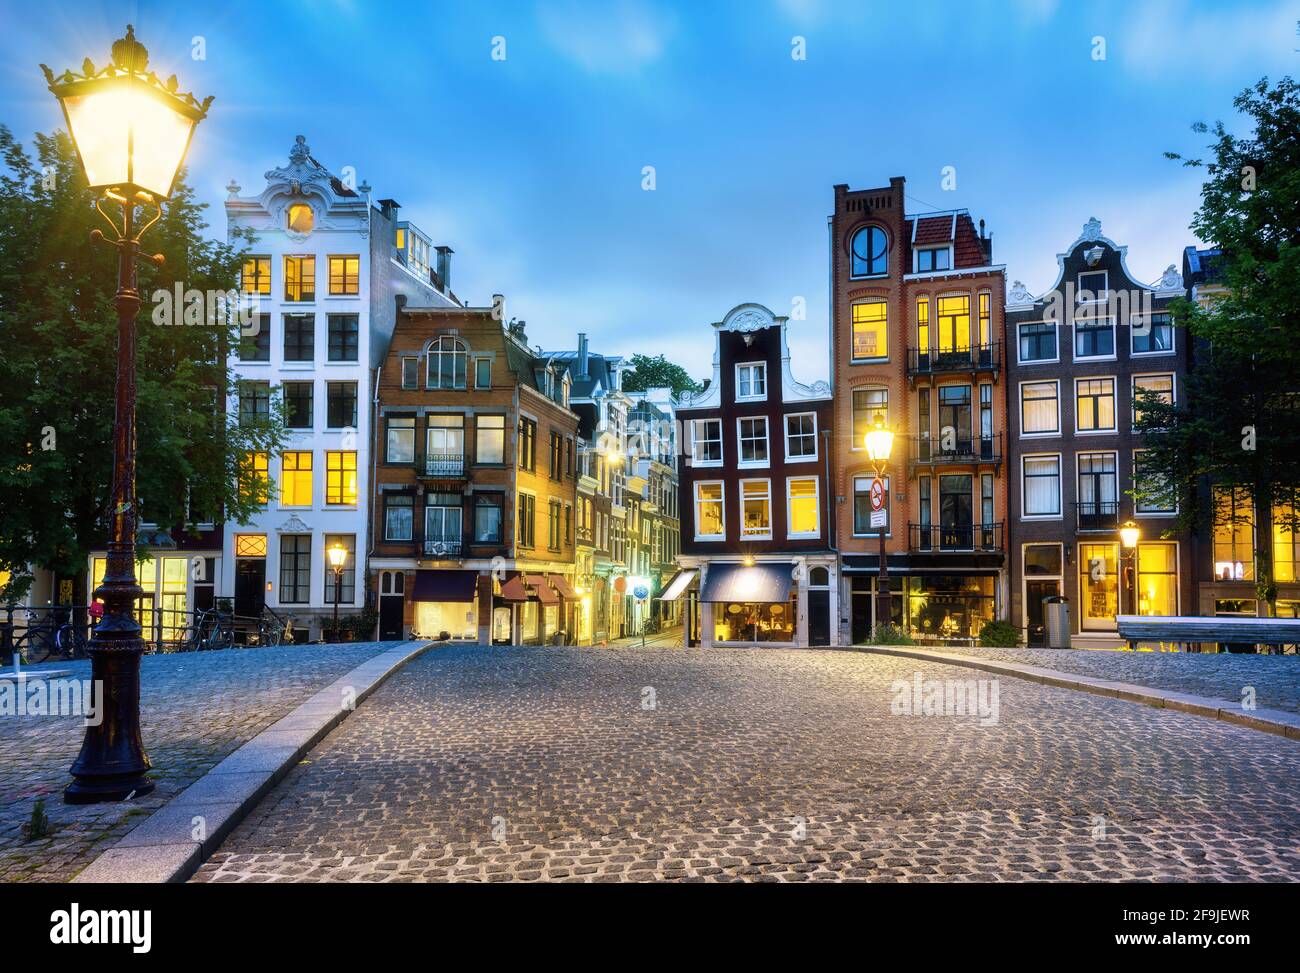 Amsterdam city, historical brick houses in the Old town center in evening light, North Holland, Netherlands Stock Photo